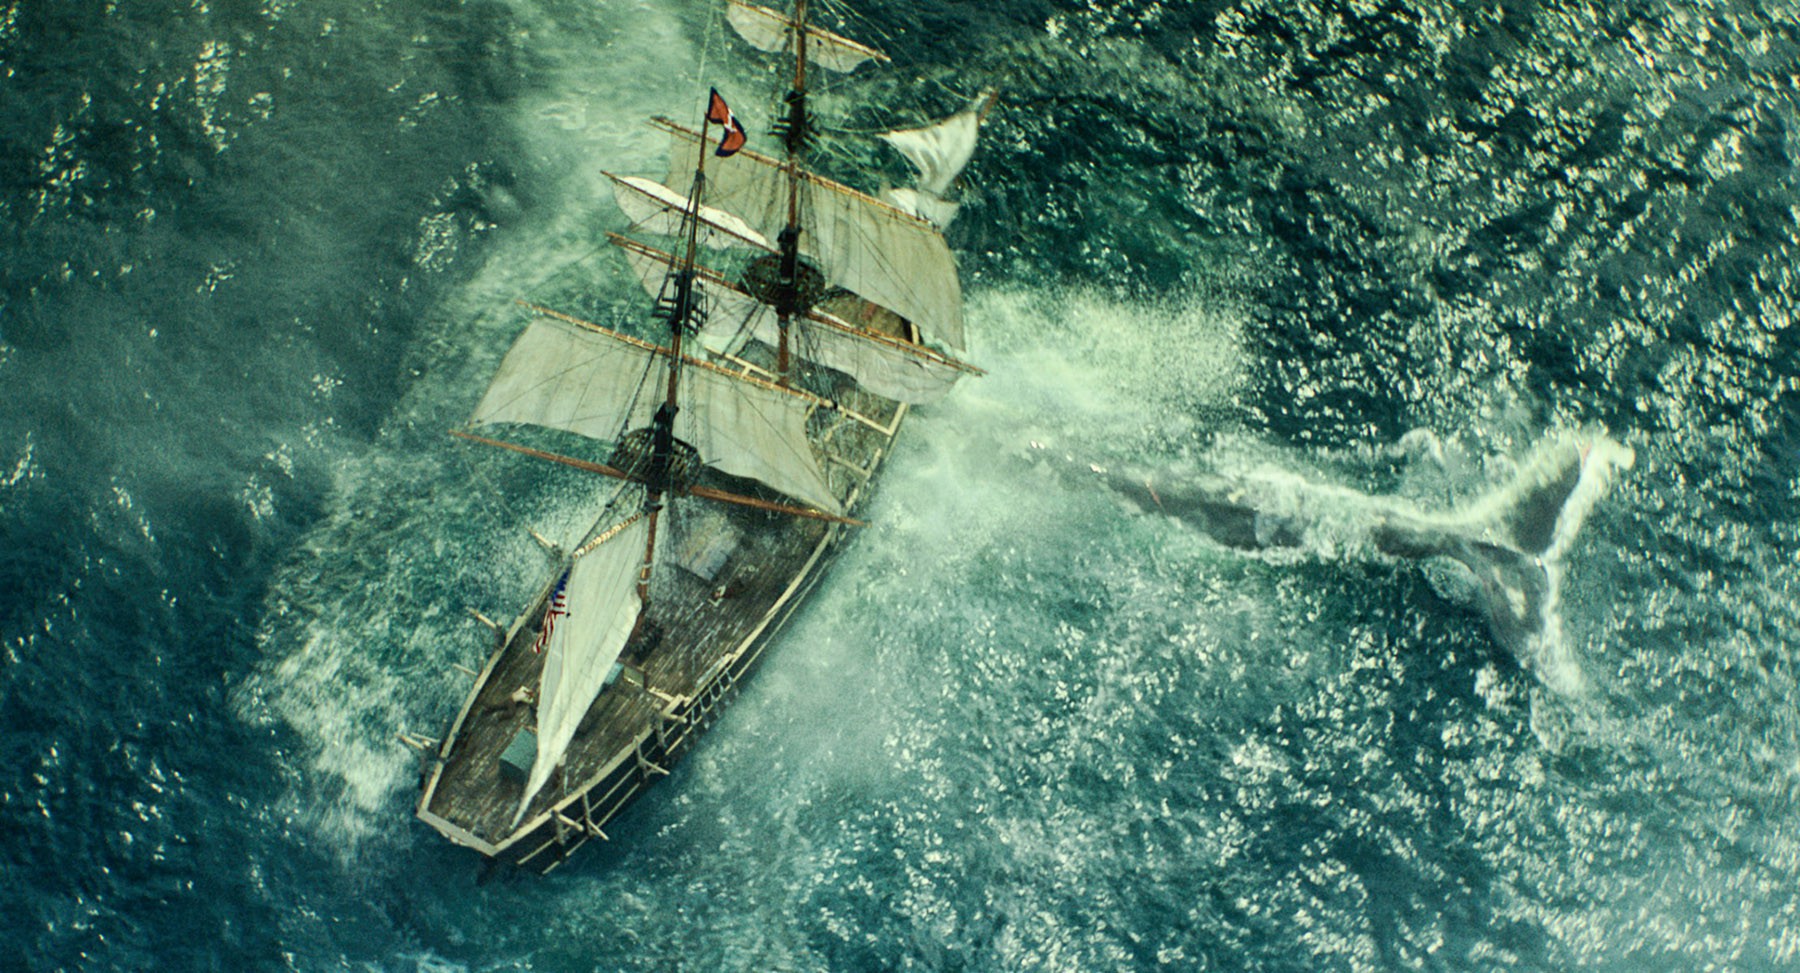 in-the-heart-of-the-sea-3-credit-courtesy-of-warner-bros.-pictures